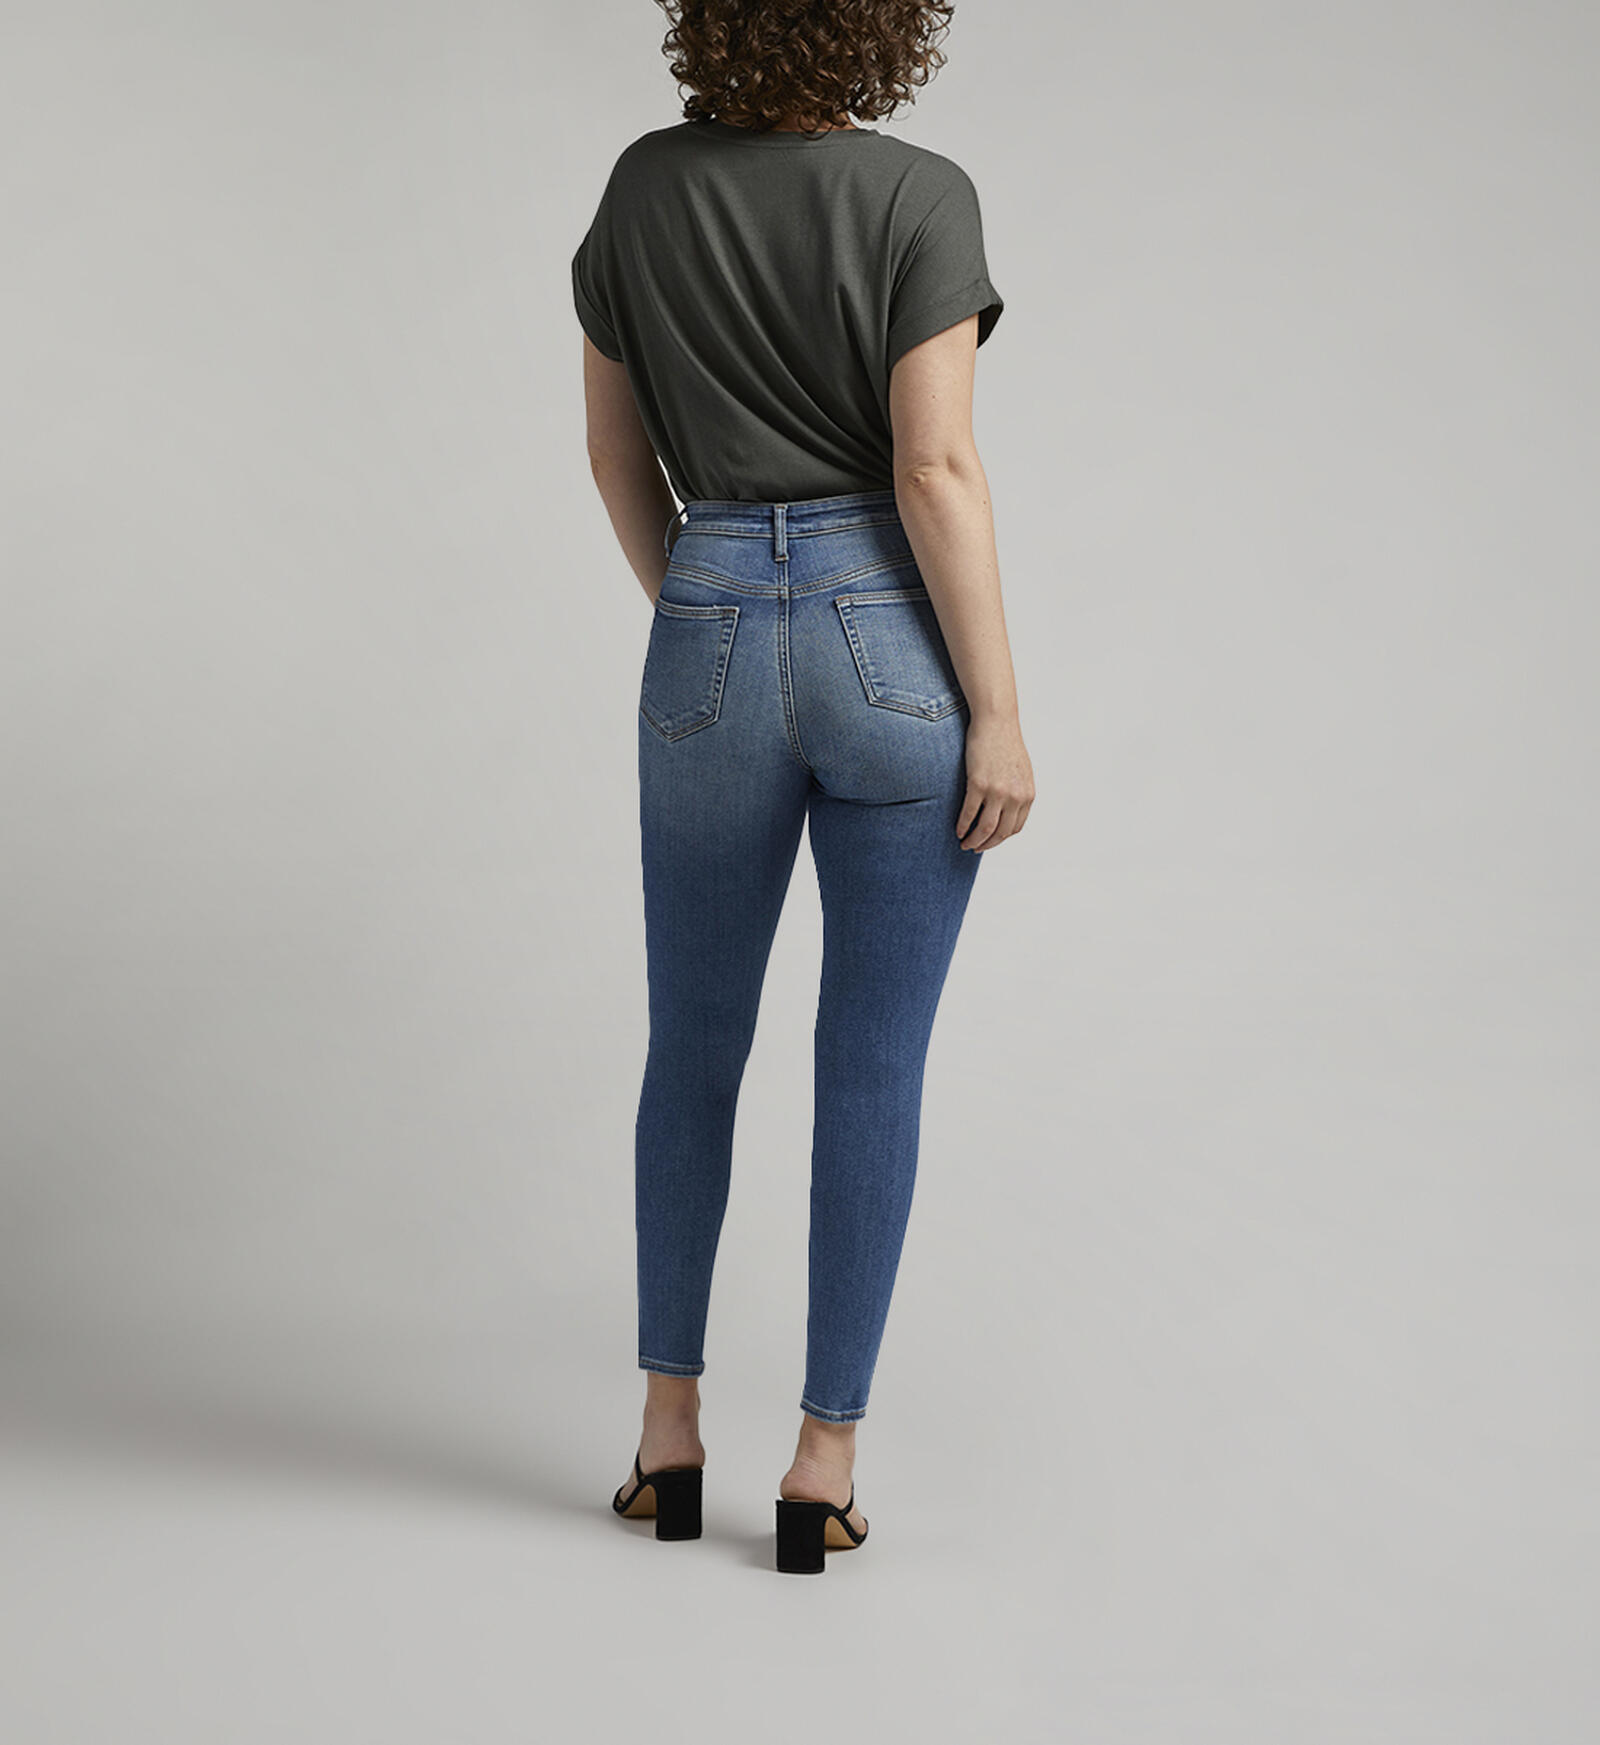 Jeans Jeans for Rise Stretch Forever | US Buy USD 74.00 Jag High New